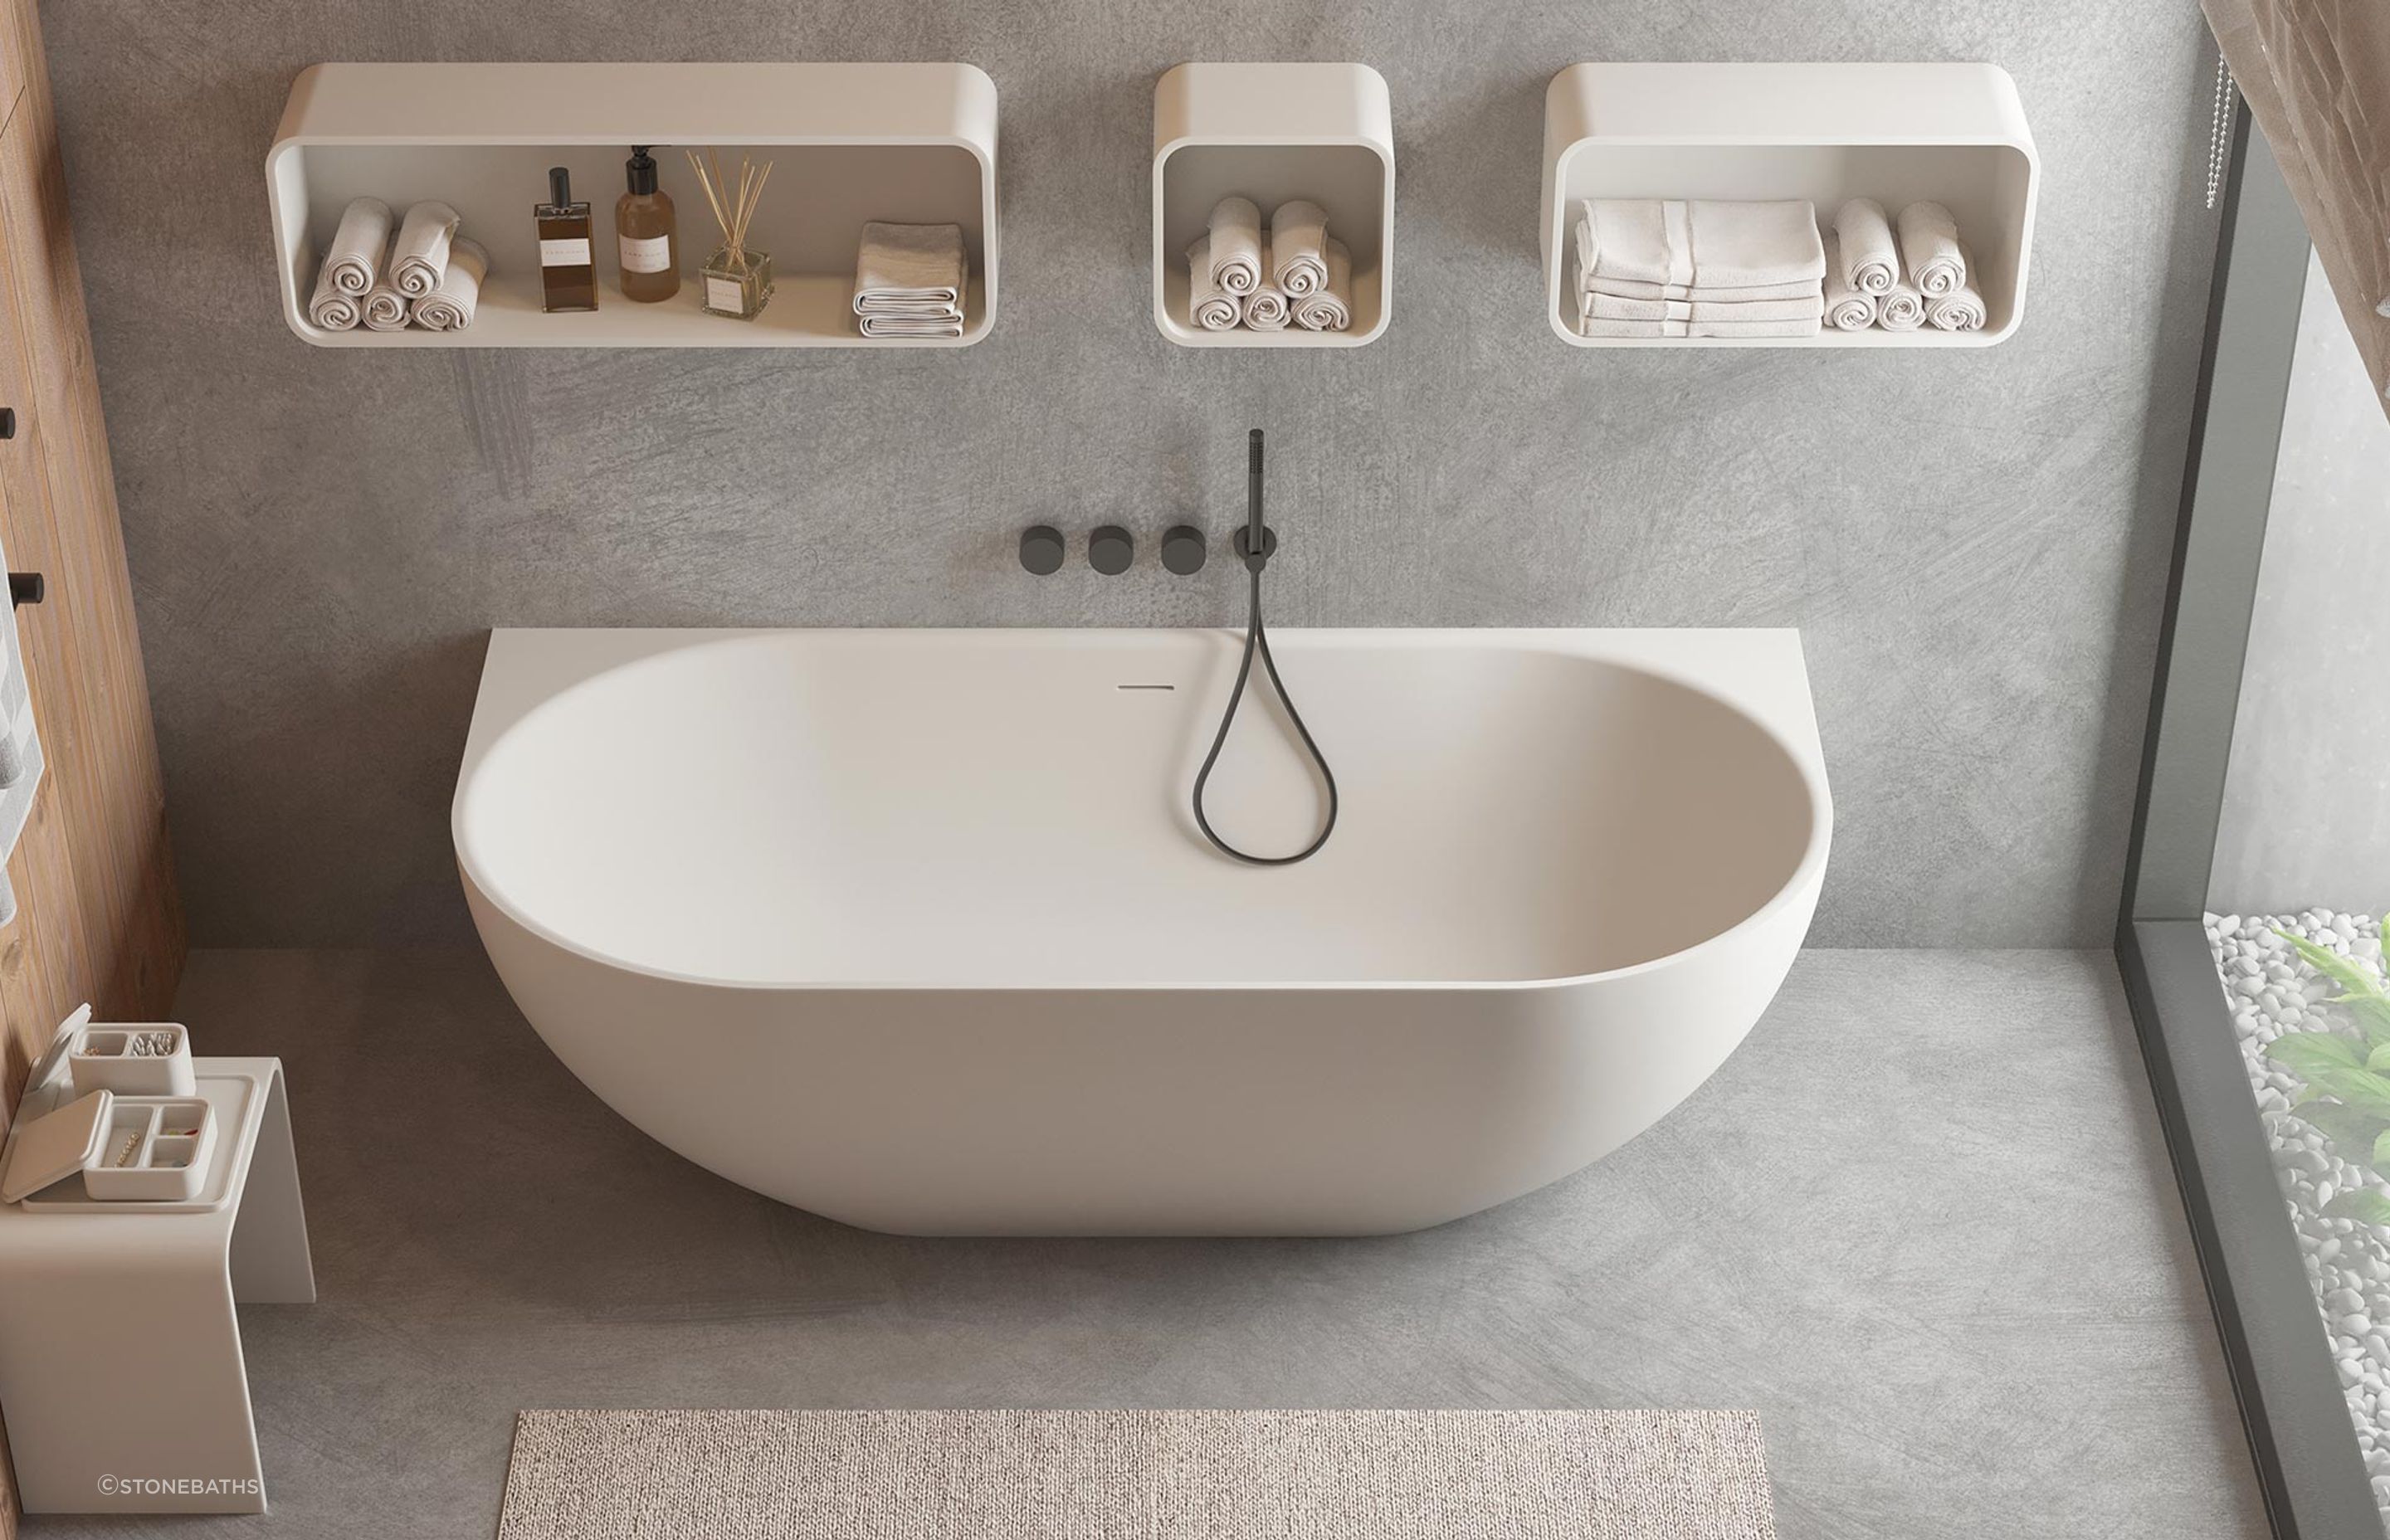 The Justina Back-to-Wall Stone Bath captures a beautiful, contemporary aesthetic and is easy to clean and maintain too.